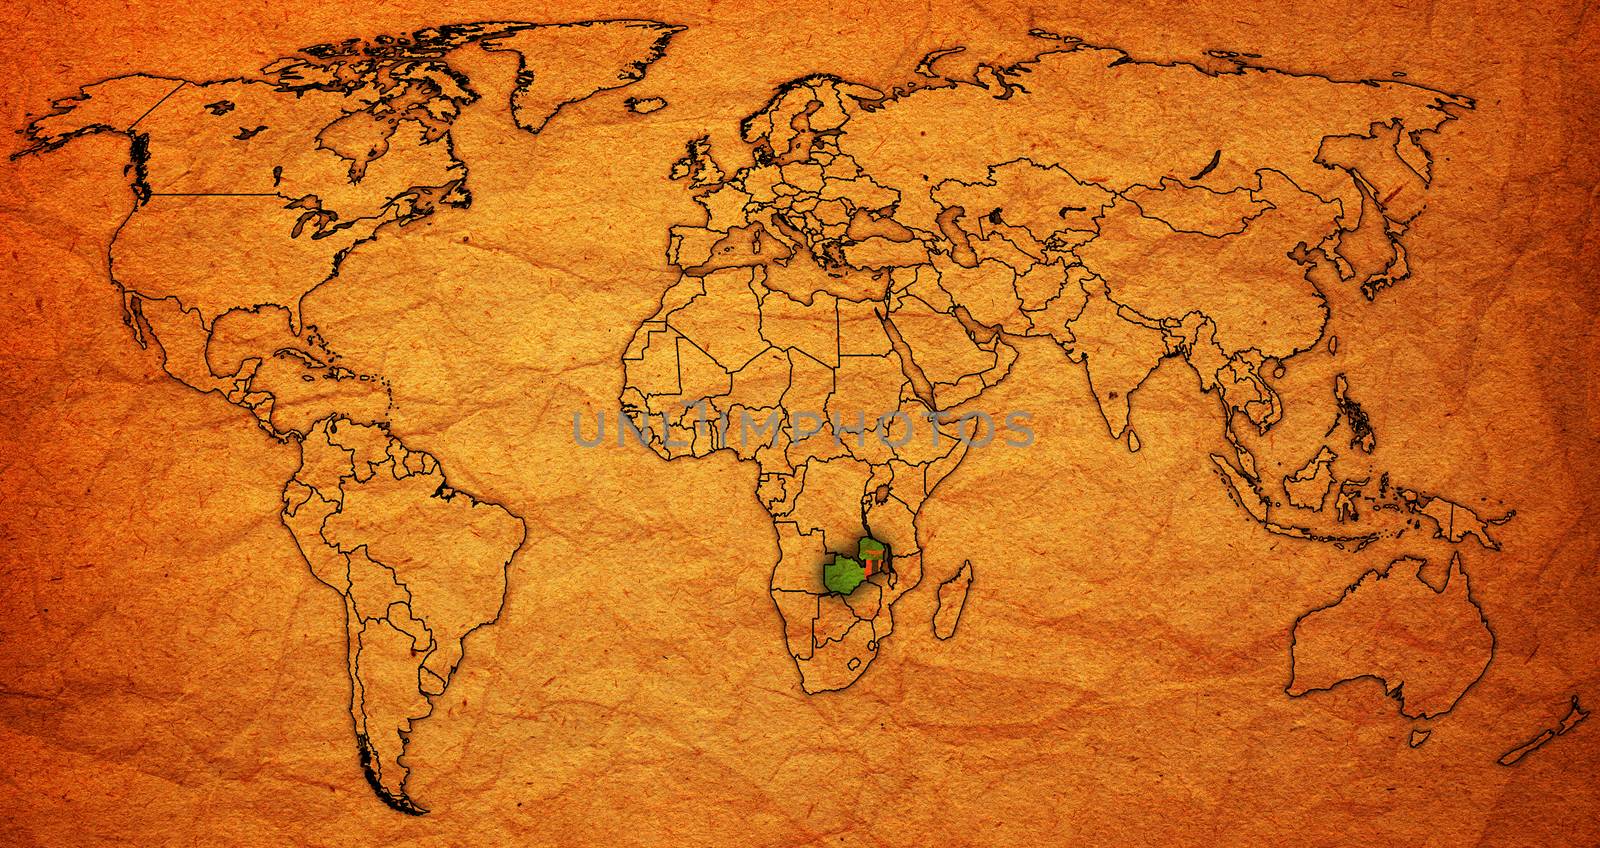 zambia territory on world map by michal812